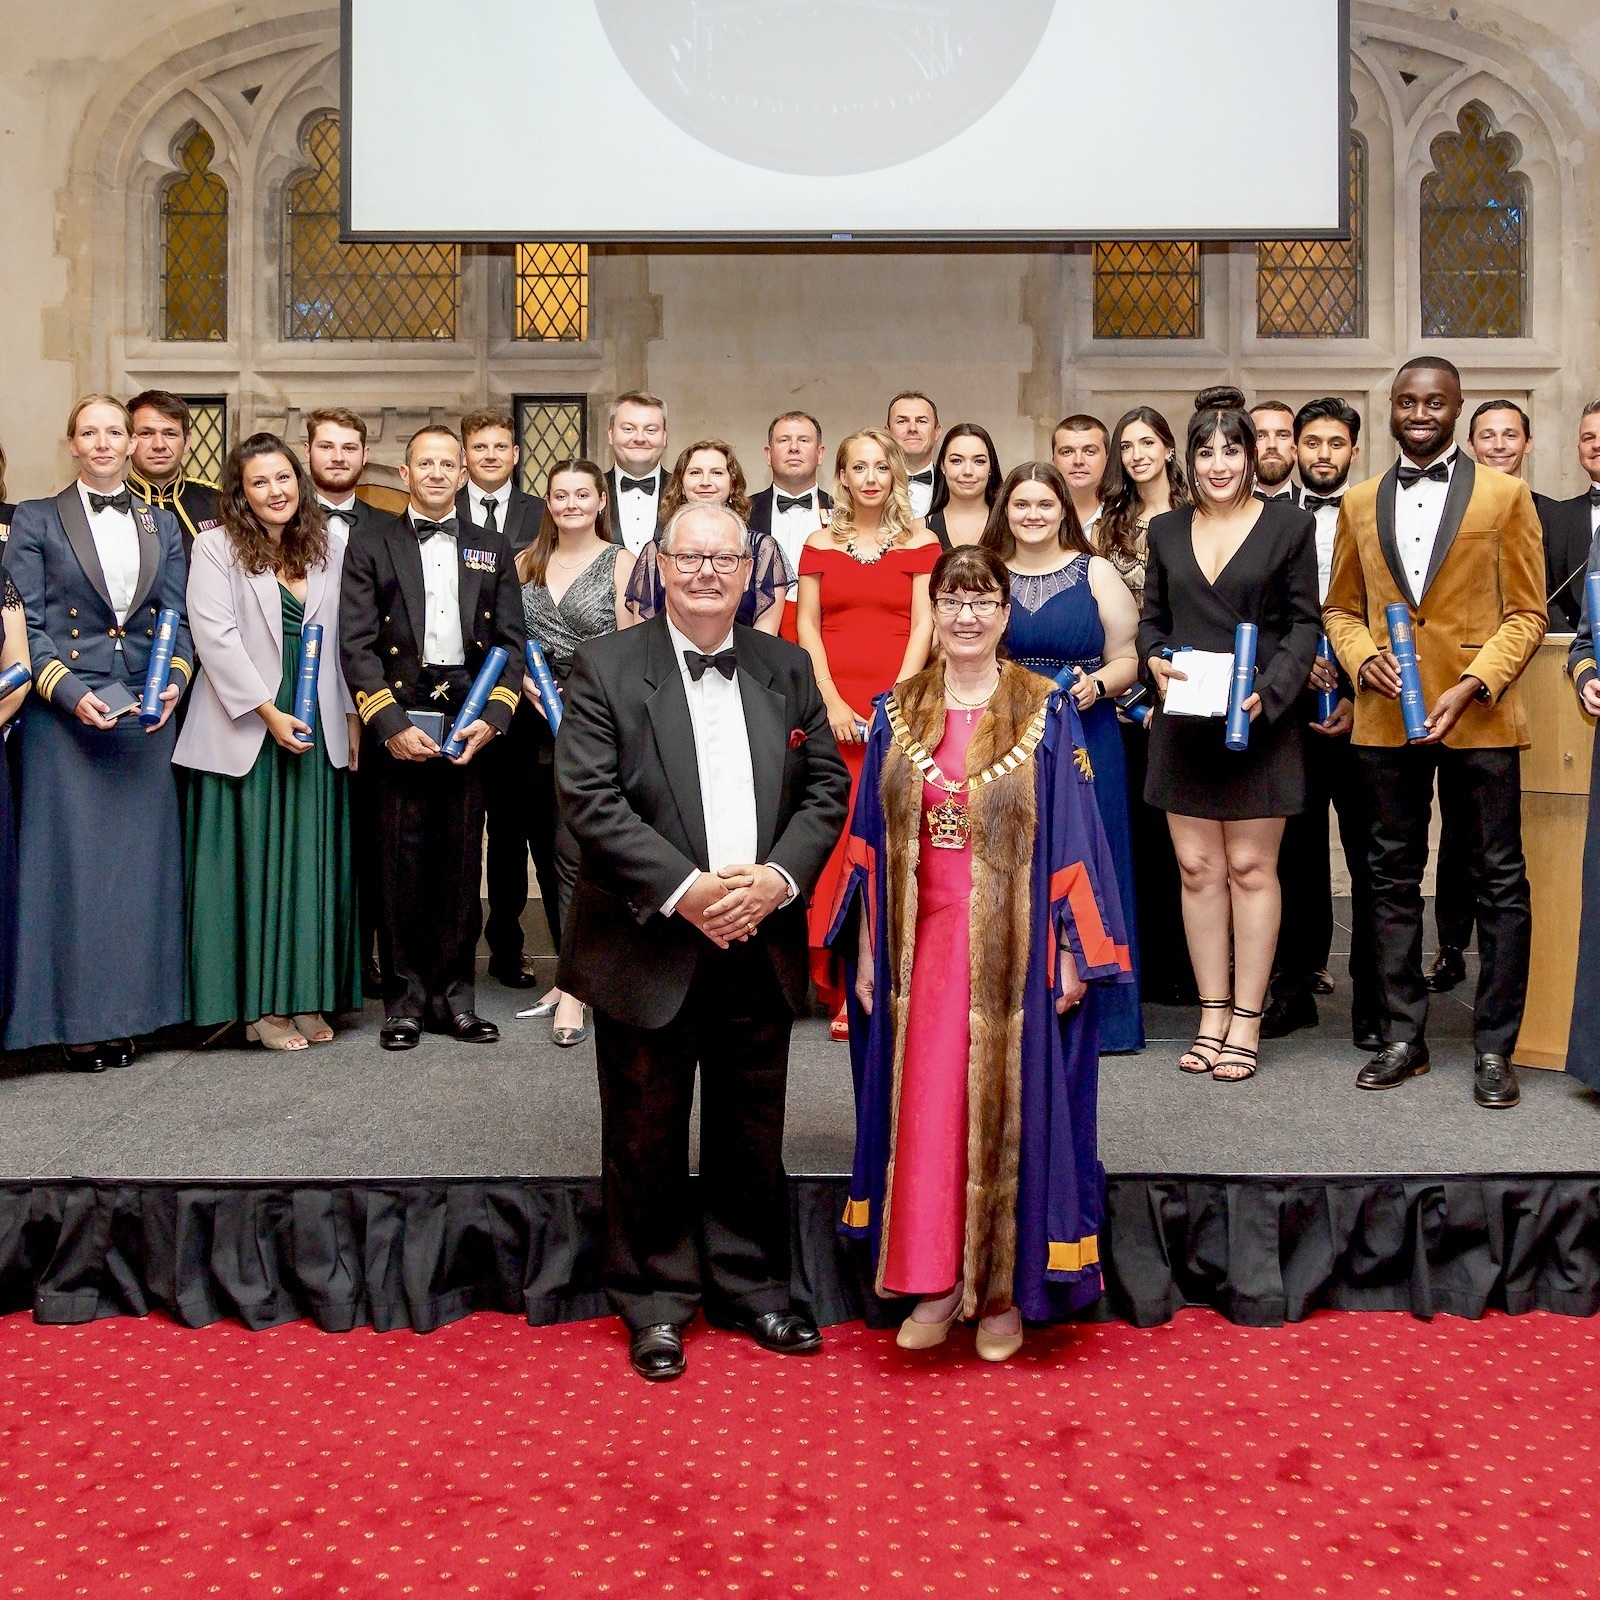 Delighted to present the Annual Awards of the Worshipful Company of Engineers at Guildhall. A fantastic array of talent at every level.